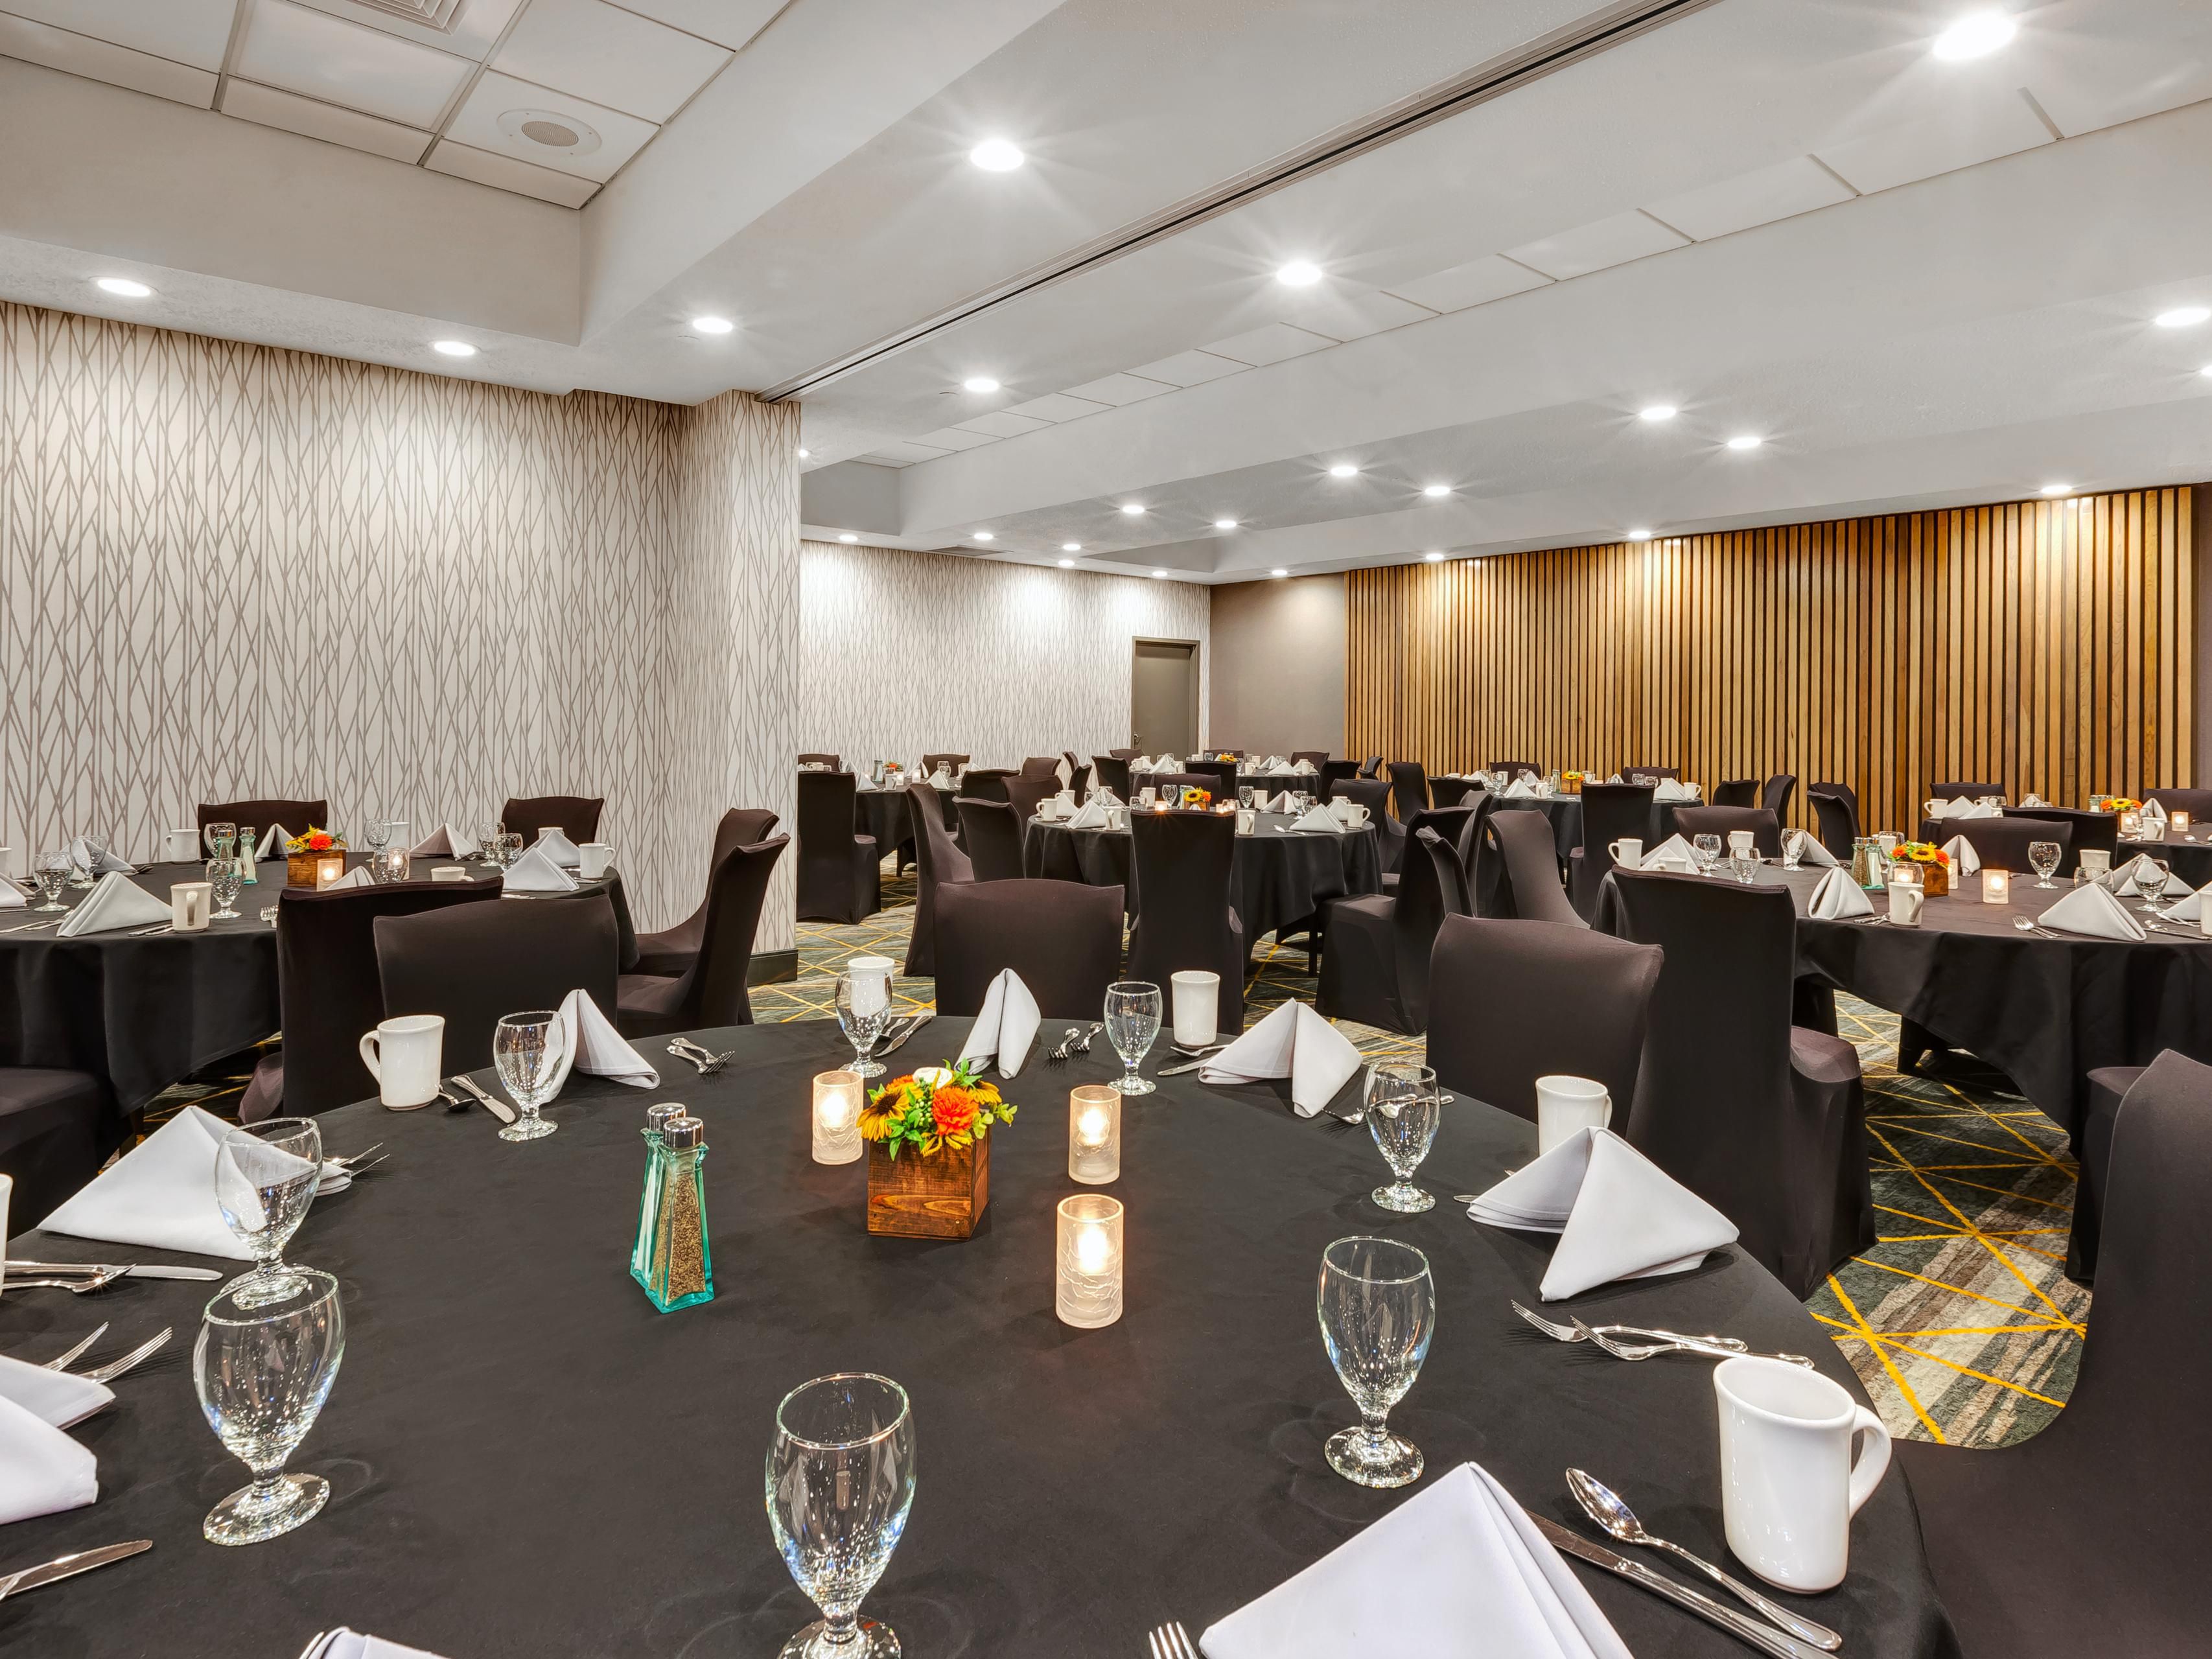 With over 1500 sq. ft. of meeting space we can offer you the perfect space for hosting an unforgettable event in the heart of downtown. Our staff will assist you from your initial inquiry until the conclusion of your event. We take your vision and make it a reality.